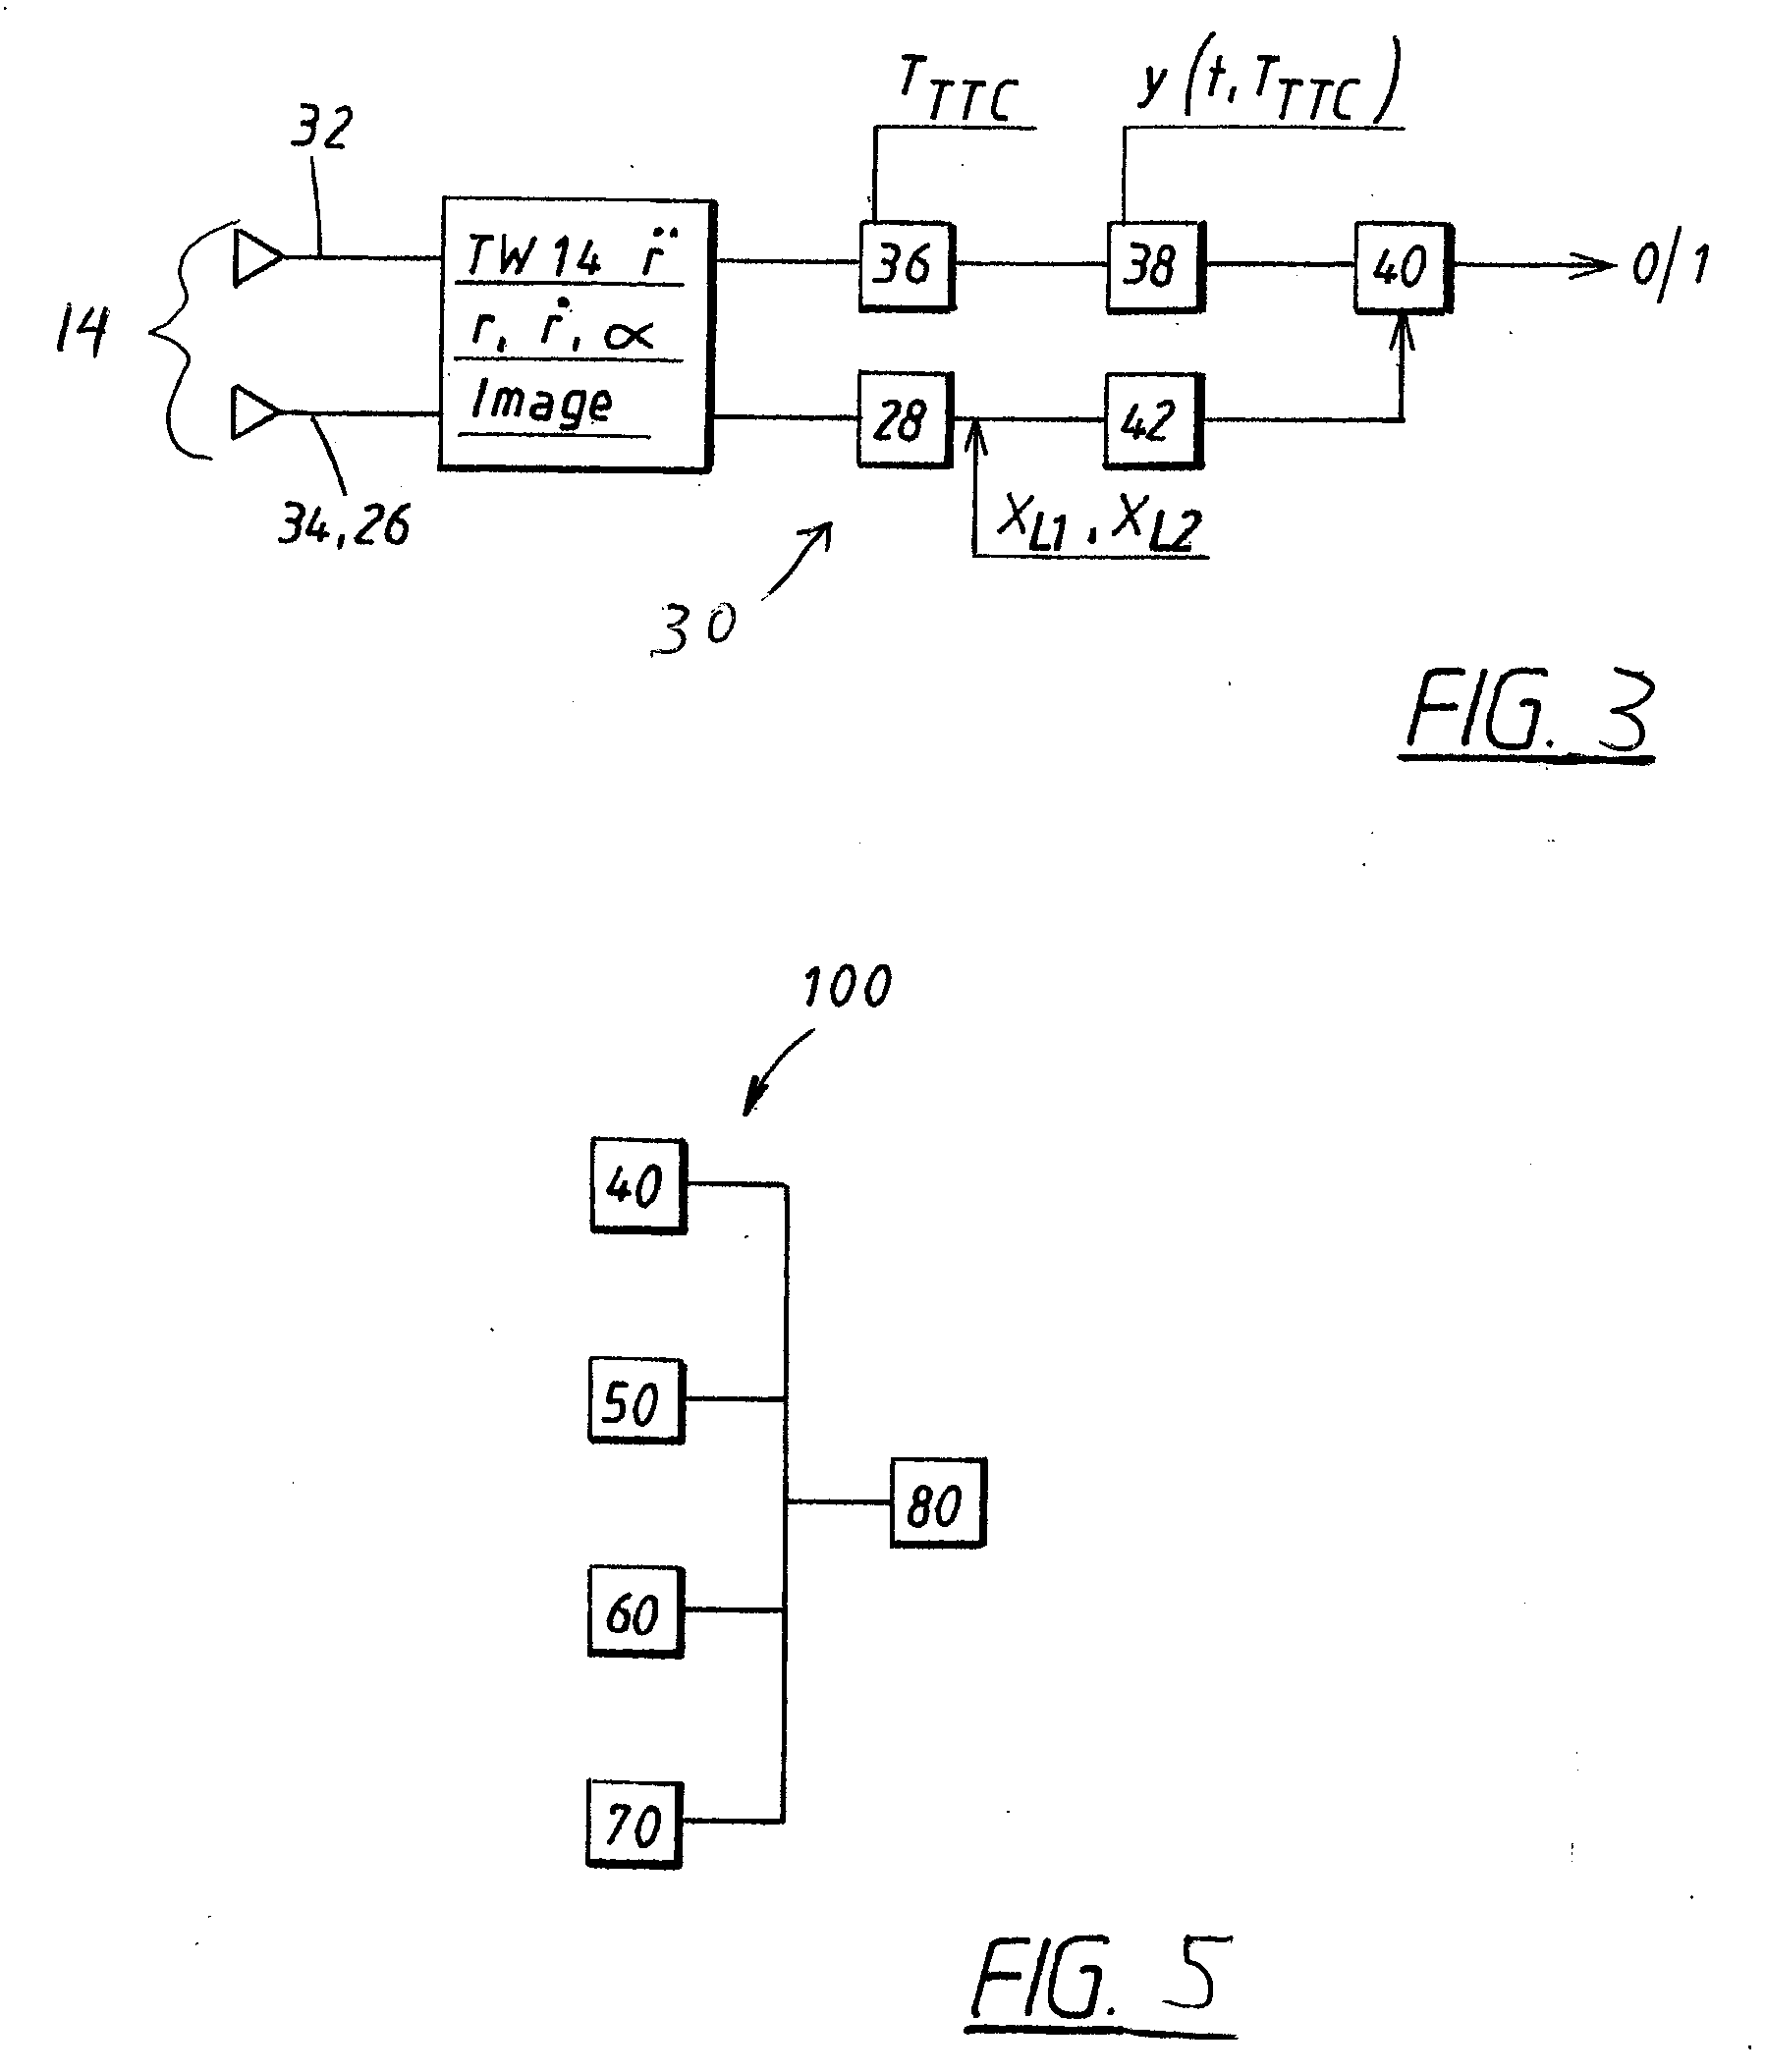 Method and system for collision course prediction and collision avoidance and mitigation